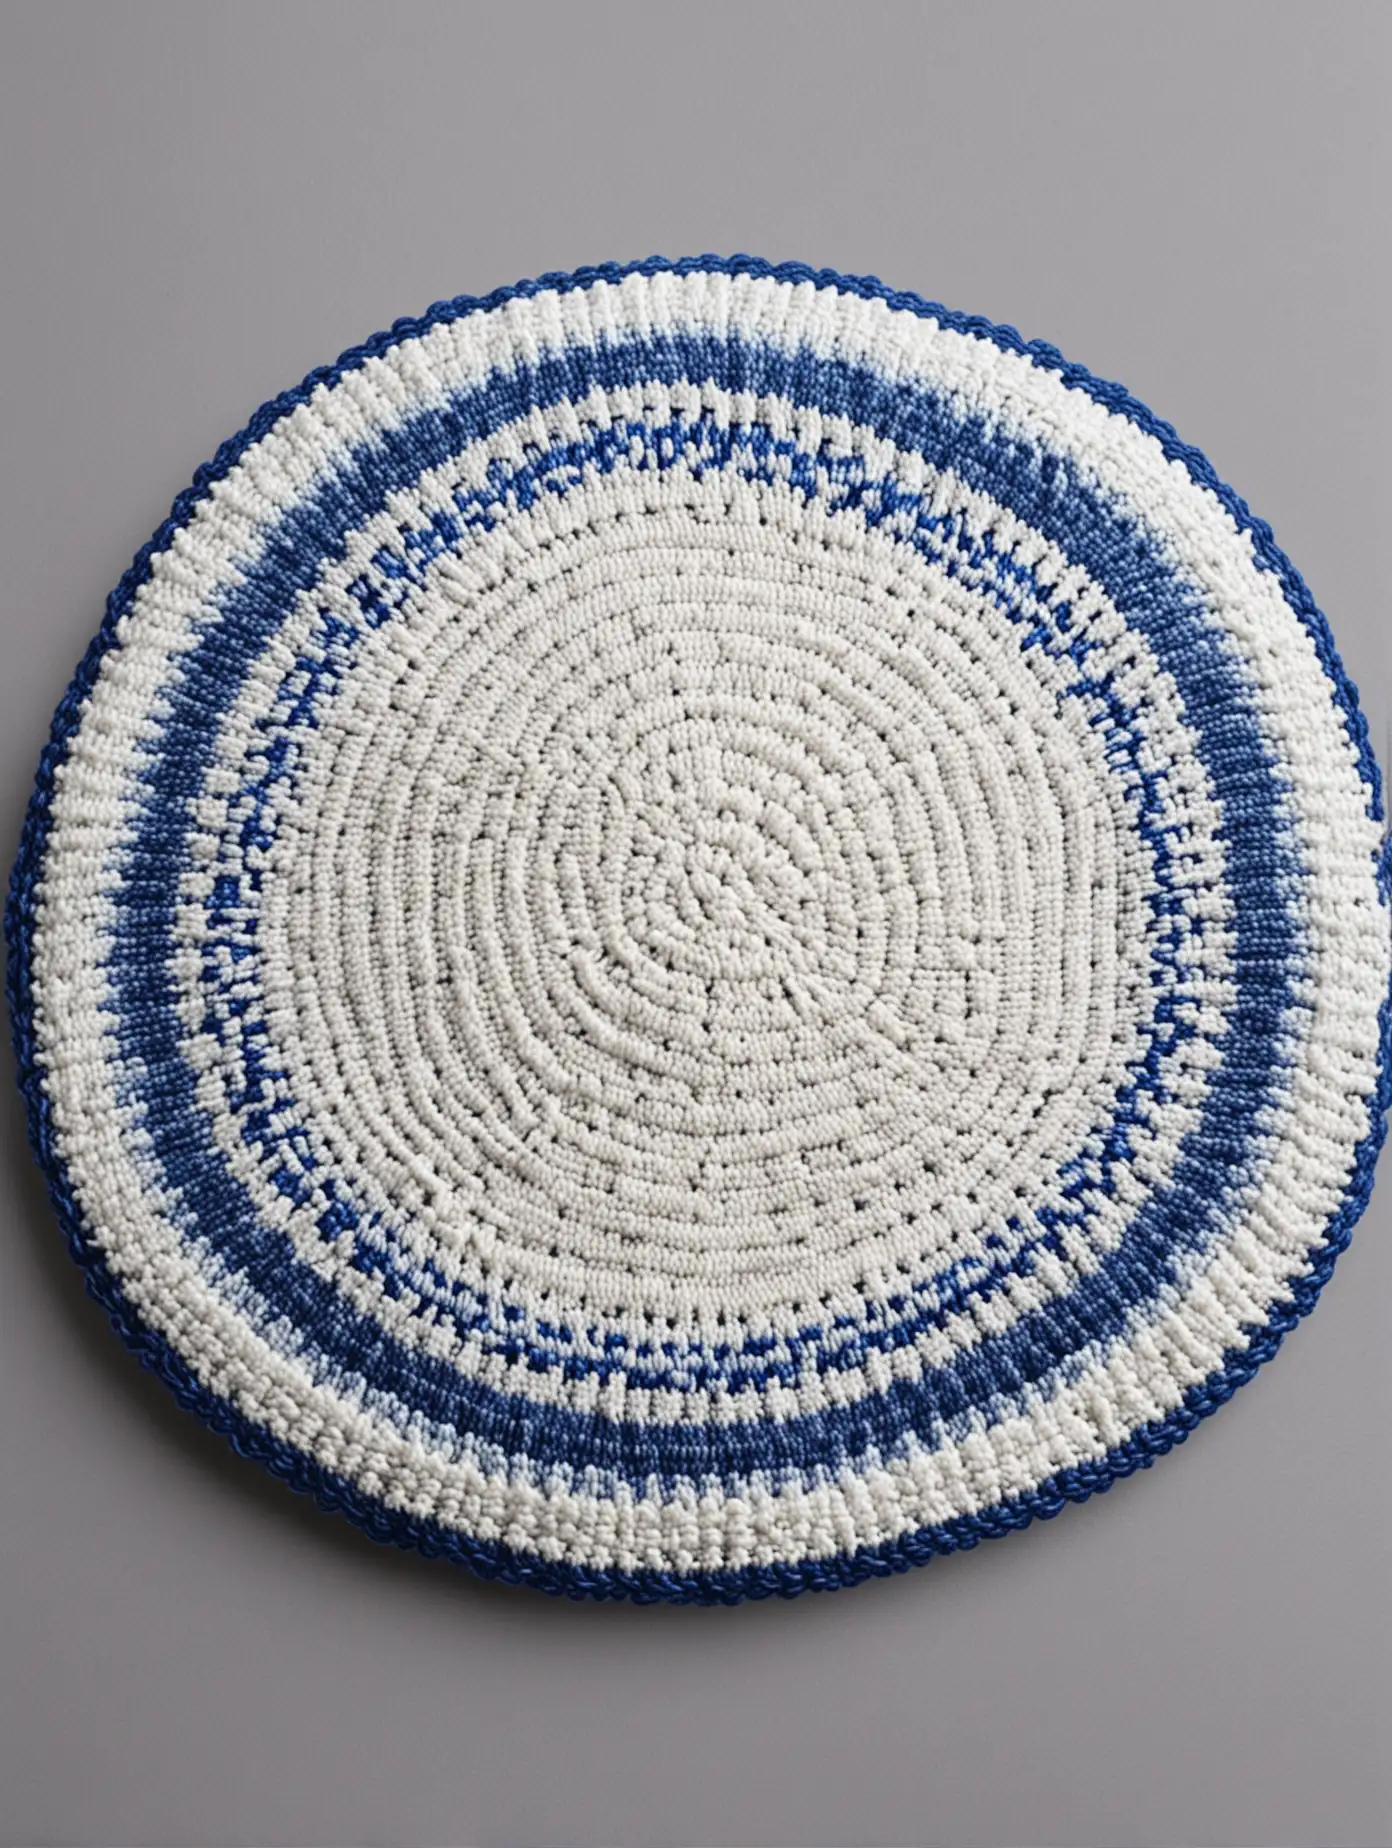 Israeli Blue and White Knitted Kippah Traditional Religious Attire